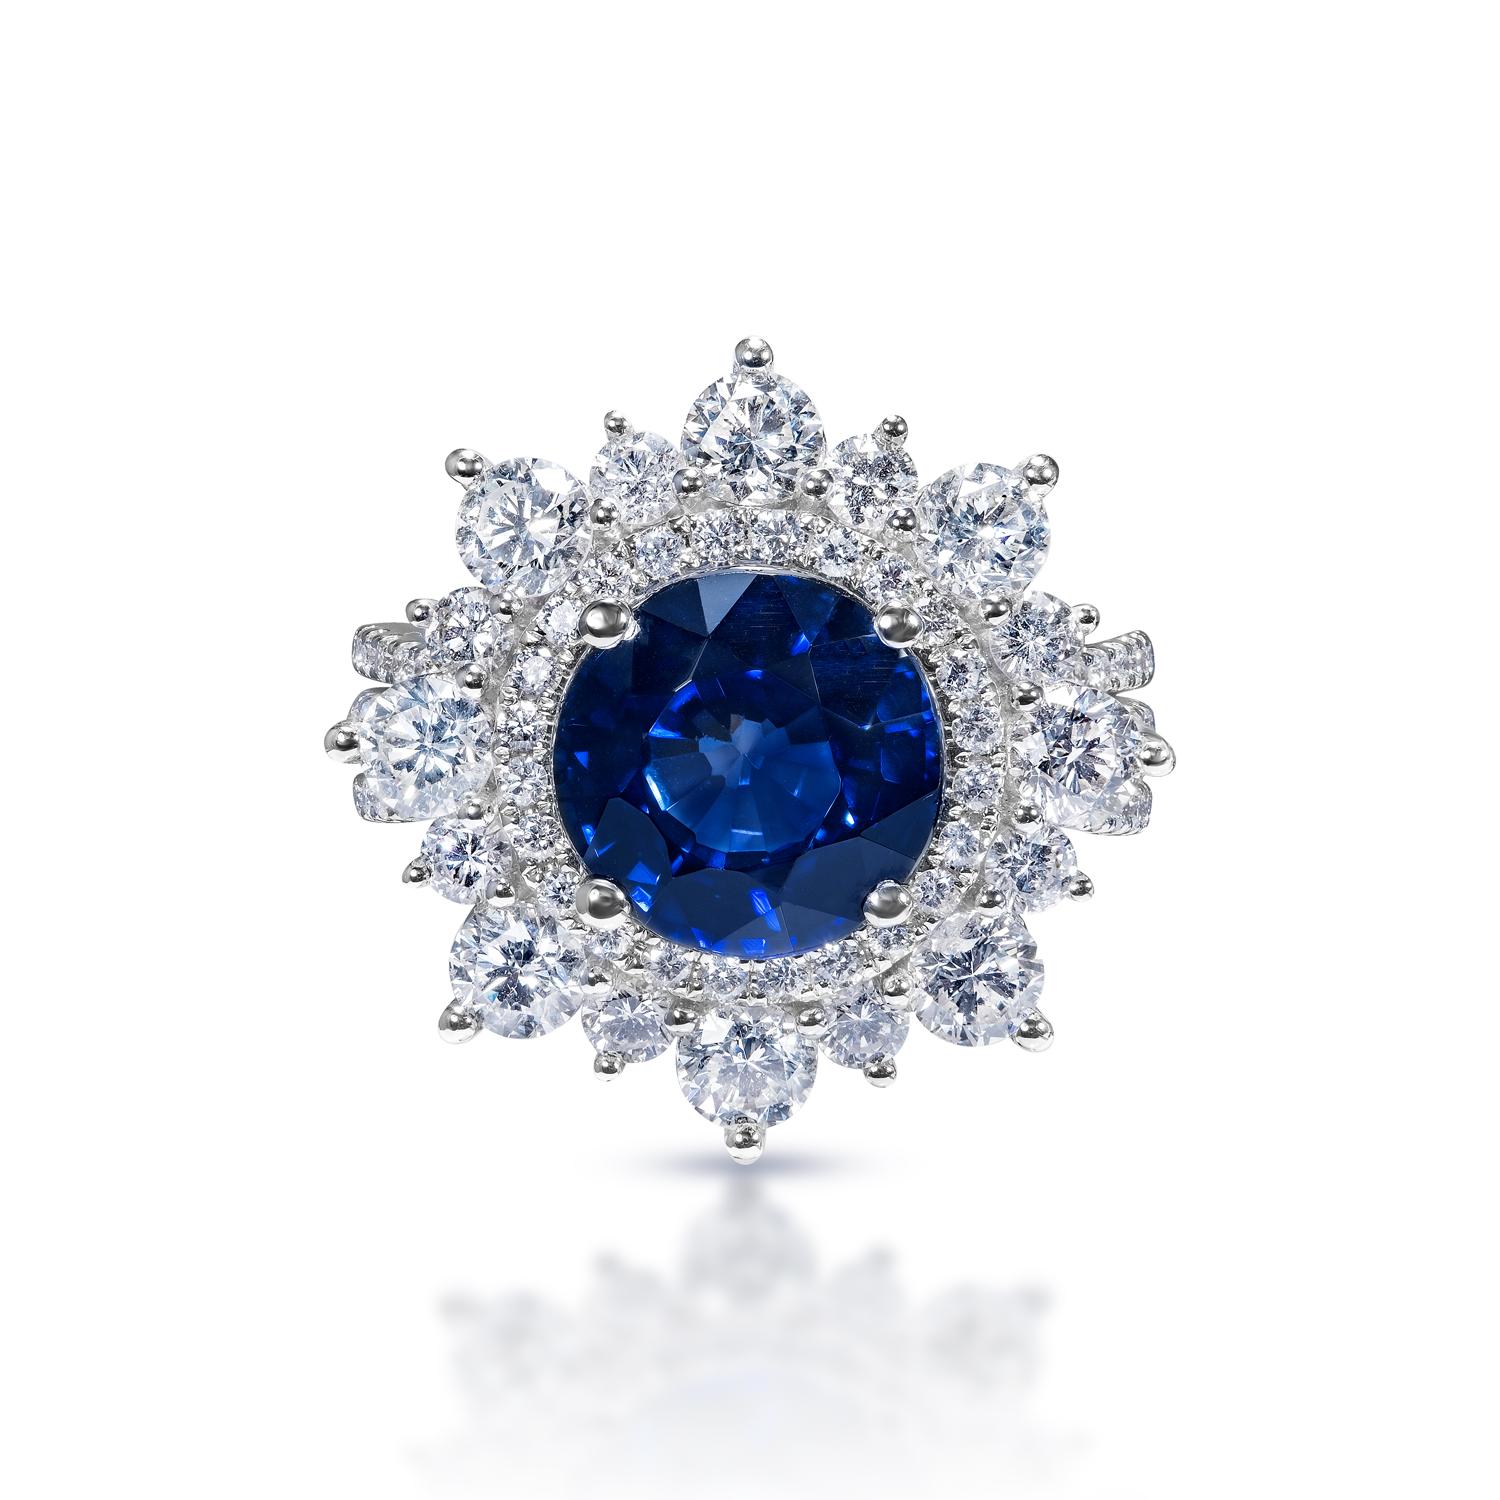 Center Stone Sapphire Ring:
Carat Weight: 4.72 Carats
Color: Blue Sapphire - Diffused J’adore Sapphire
Style: Round Brilliant Cut

Diamond:
Carat Weight: 2.49 Carats
Shape: Round Brilliant Cut
Settings: 4 round prong & micro pave
Metal: 18 Karat